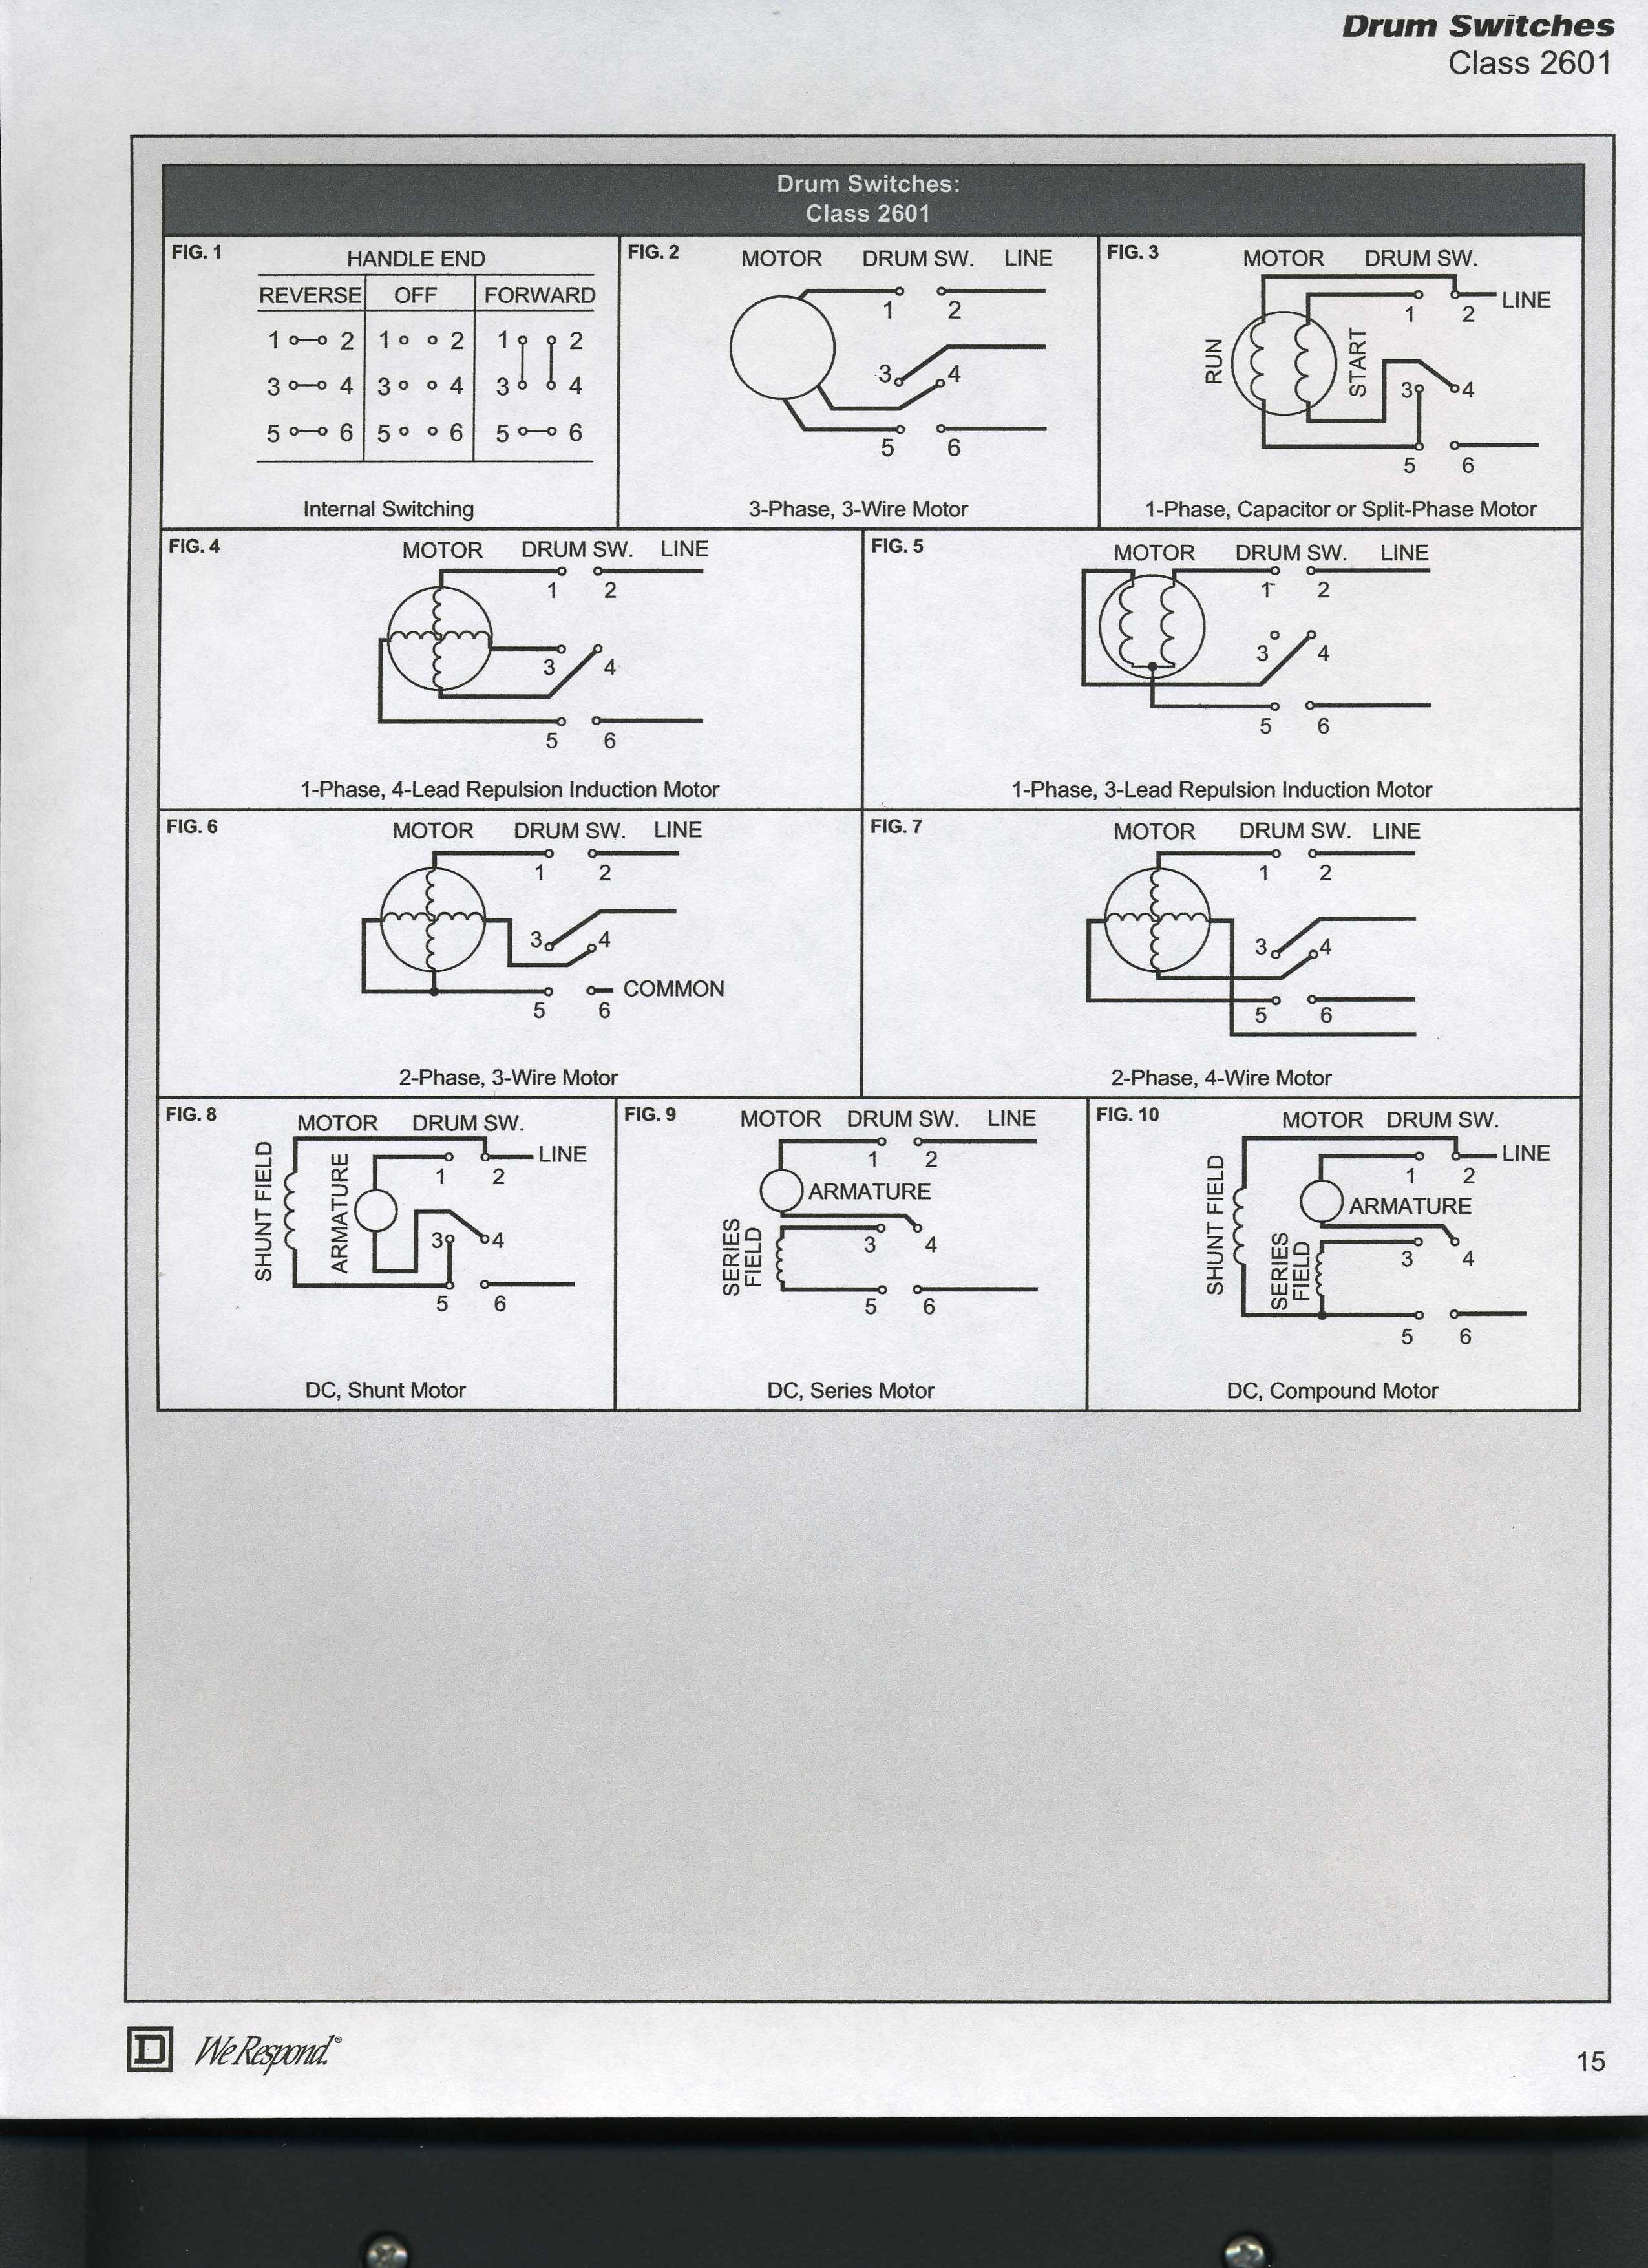 Electric Motor Wiring Diagram 110 To 220 Book 4 Wire Motor Wiring Diagram Unique The